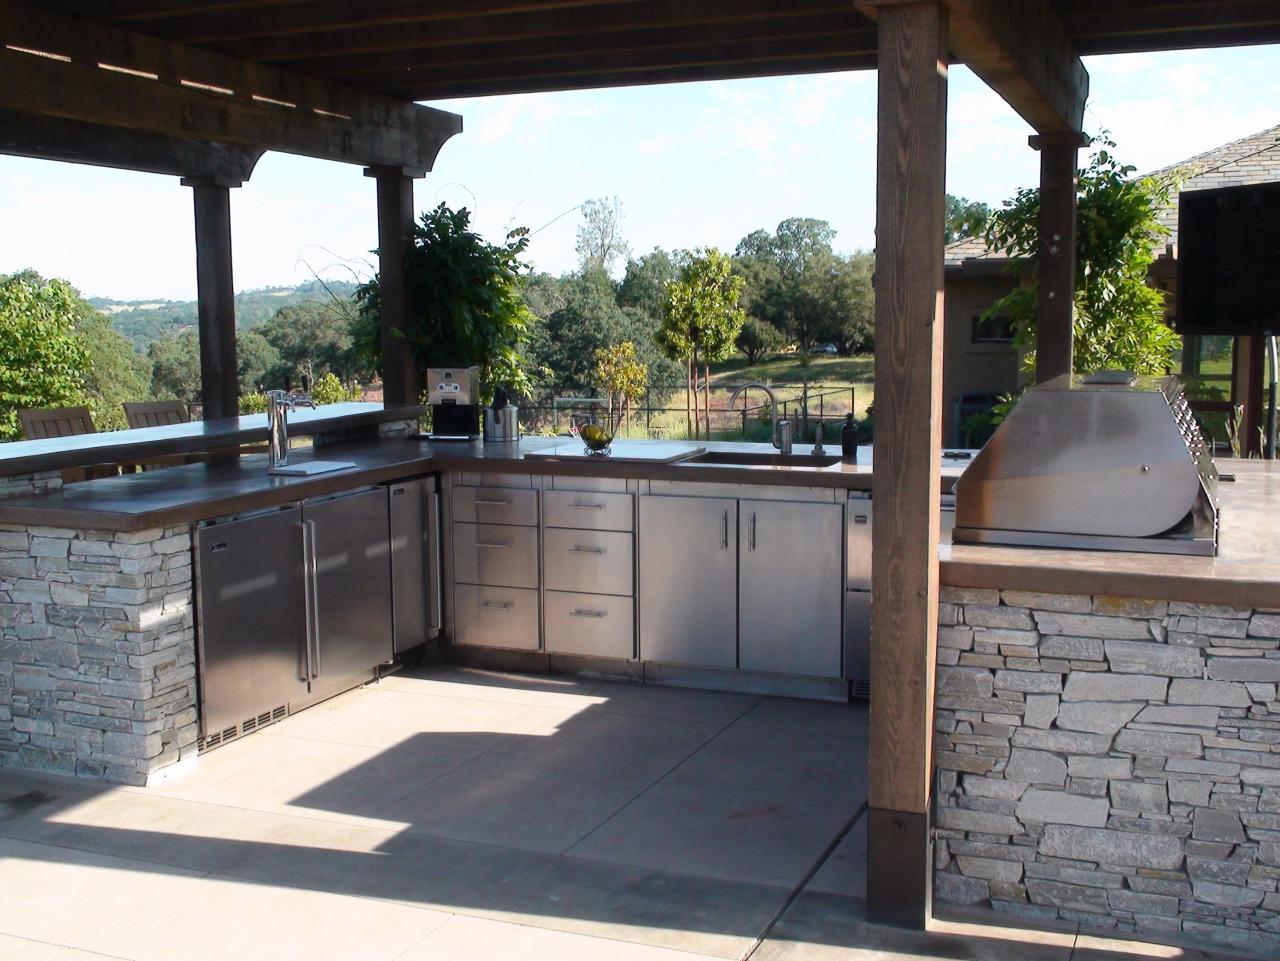 Optimizing An Outdoor Kitchen Layout, Best Outdoor Kitchens 2021